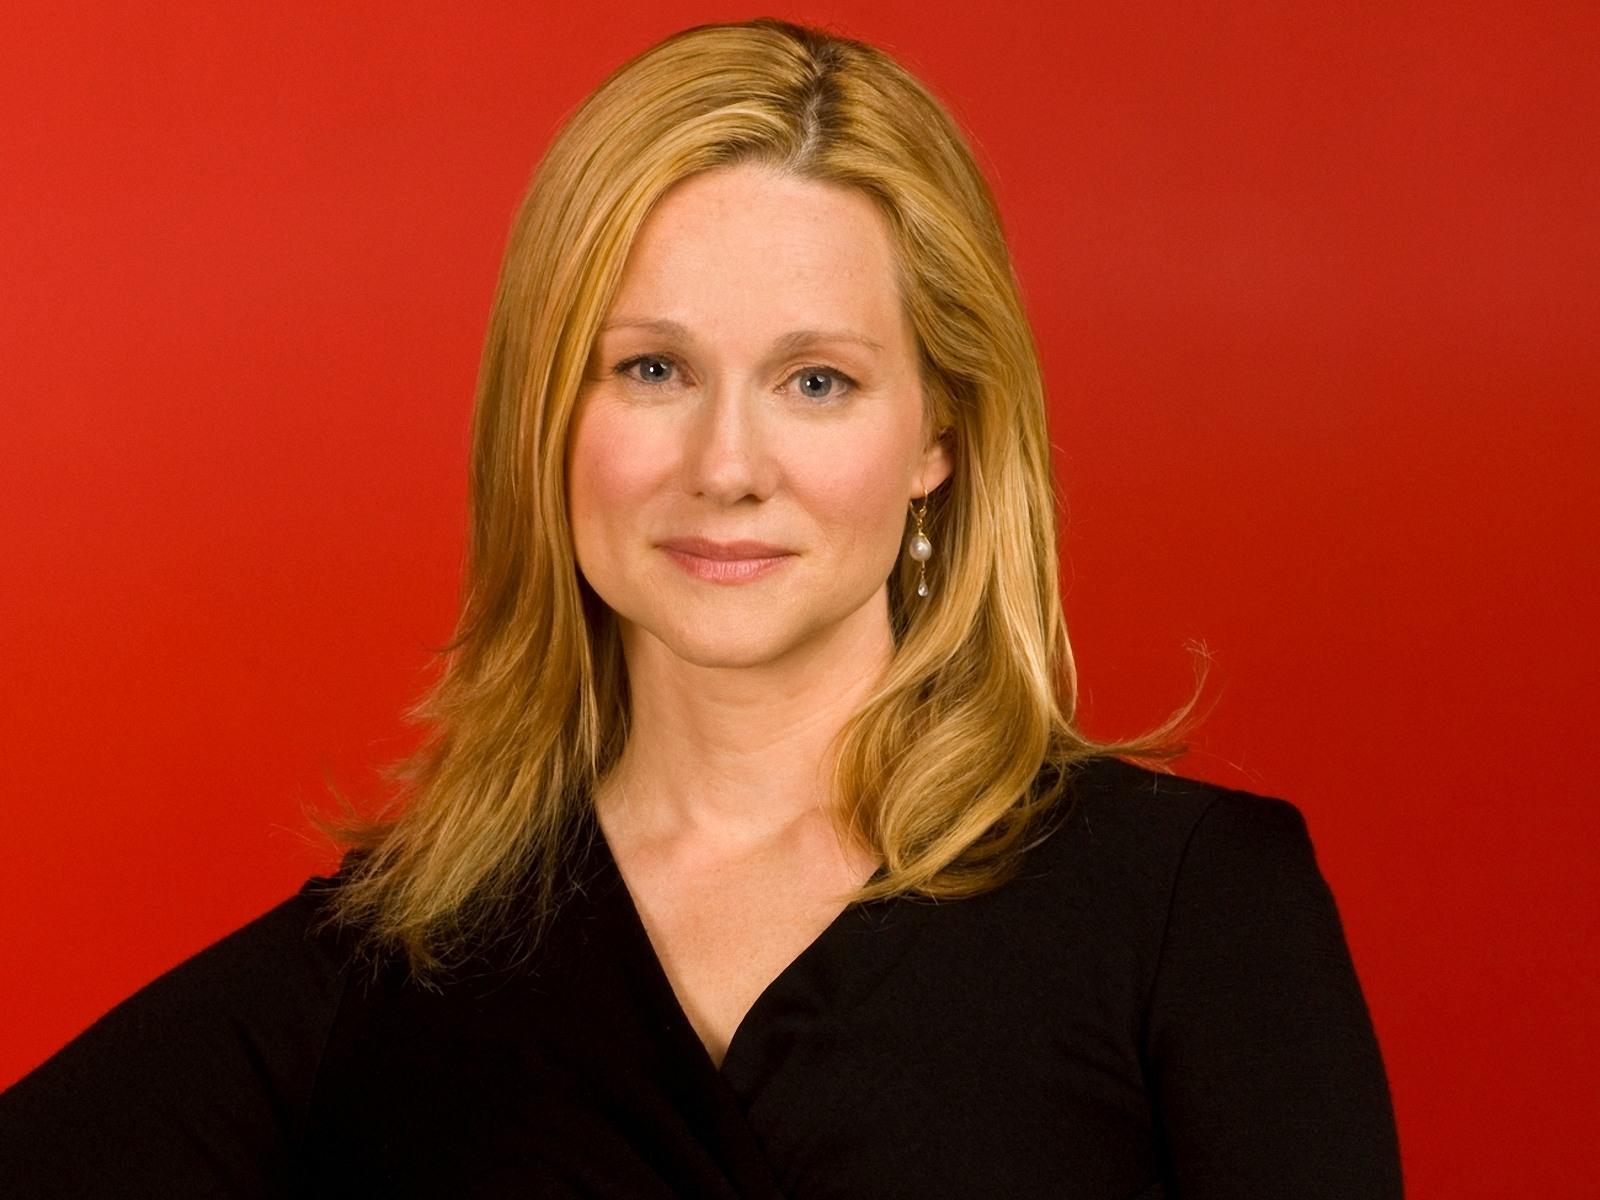 Laura Linney Wallpaper High Resolution and Quality Download